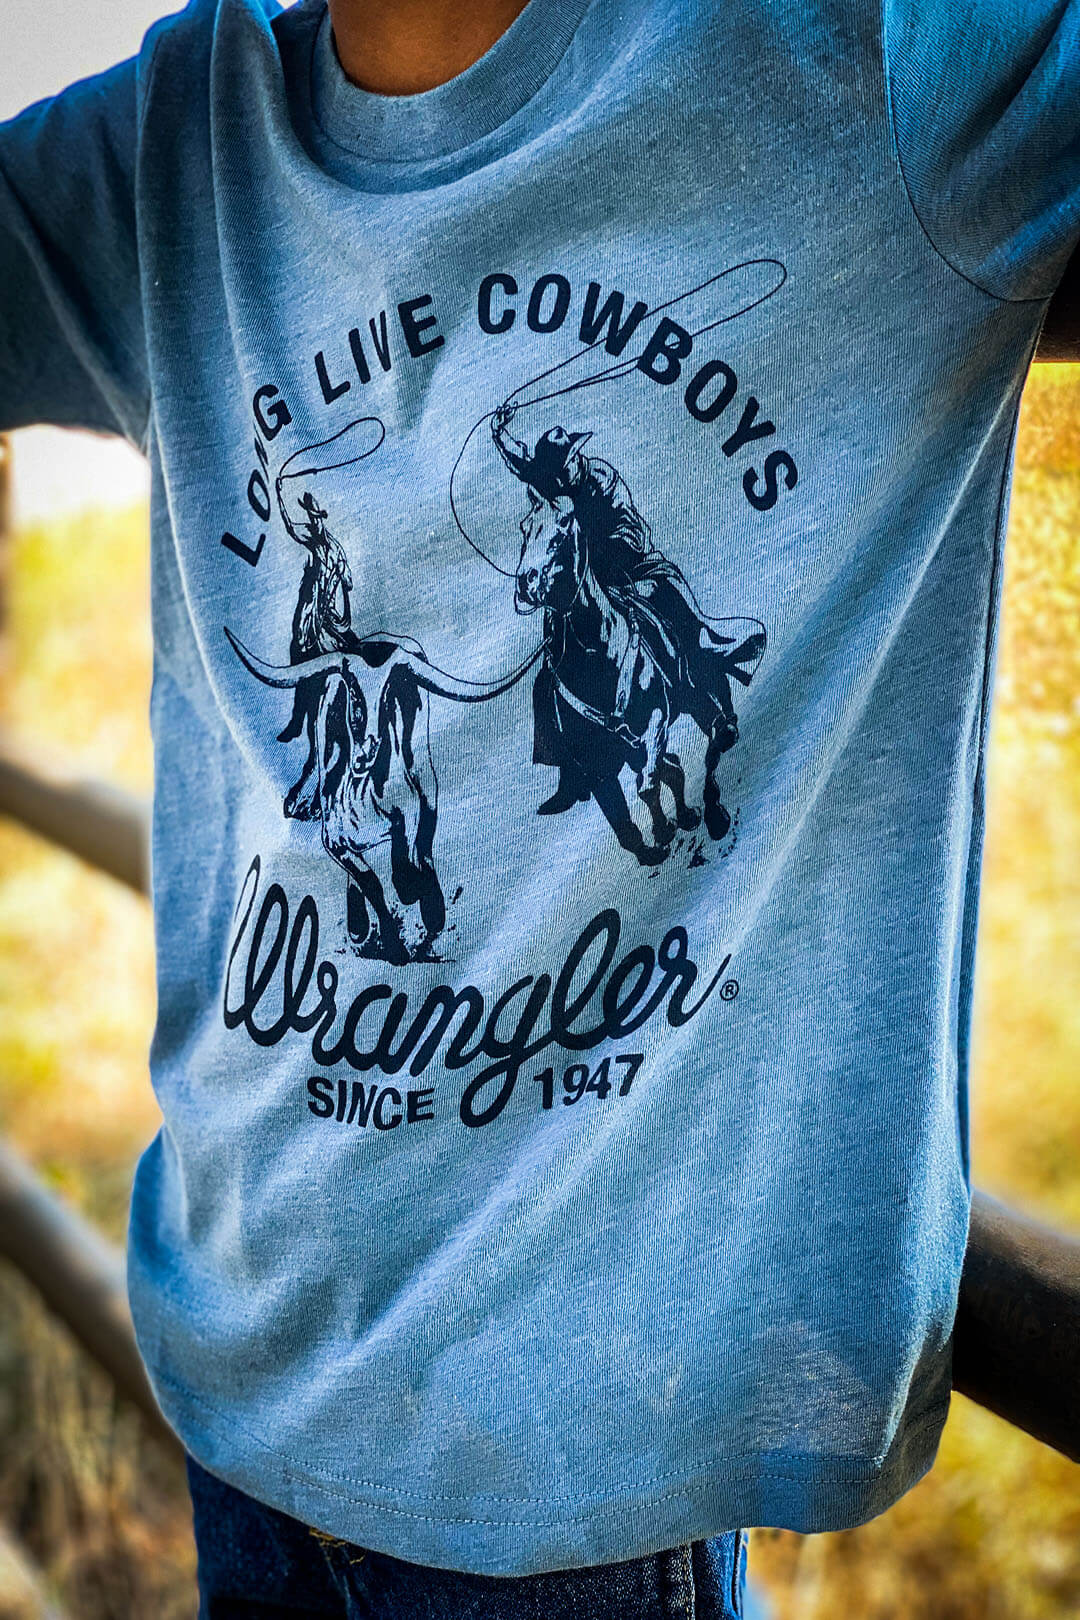 Boy wearing light blue t-shirt with navy blue writing that says long live cowboys wrangler since 1947 cowboys on horses roping bull